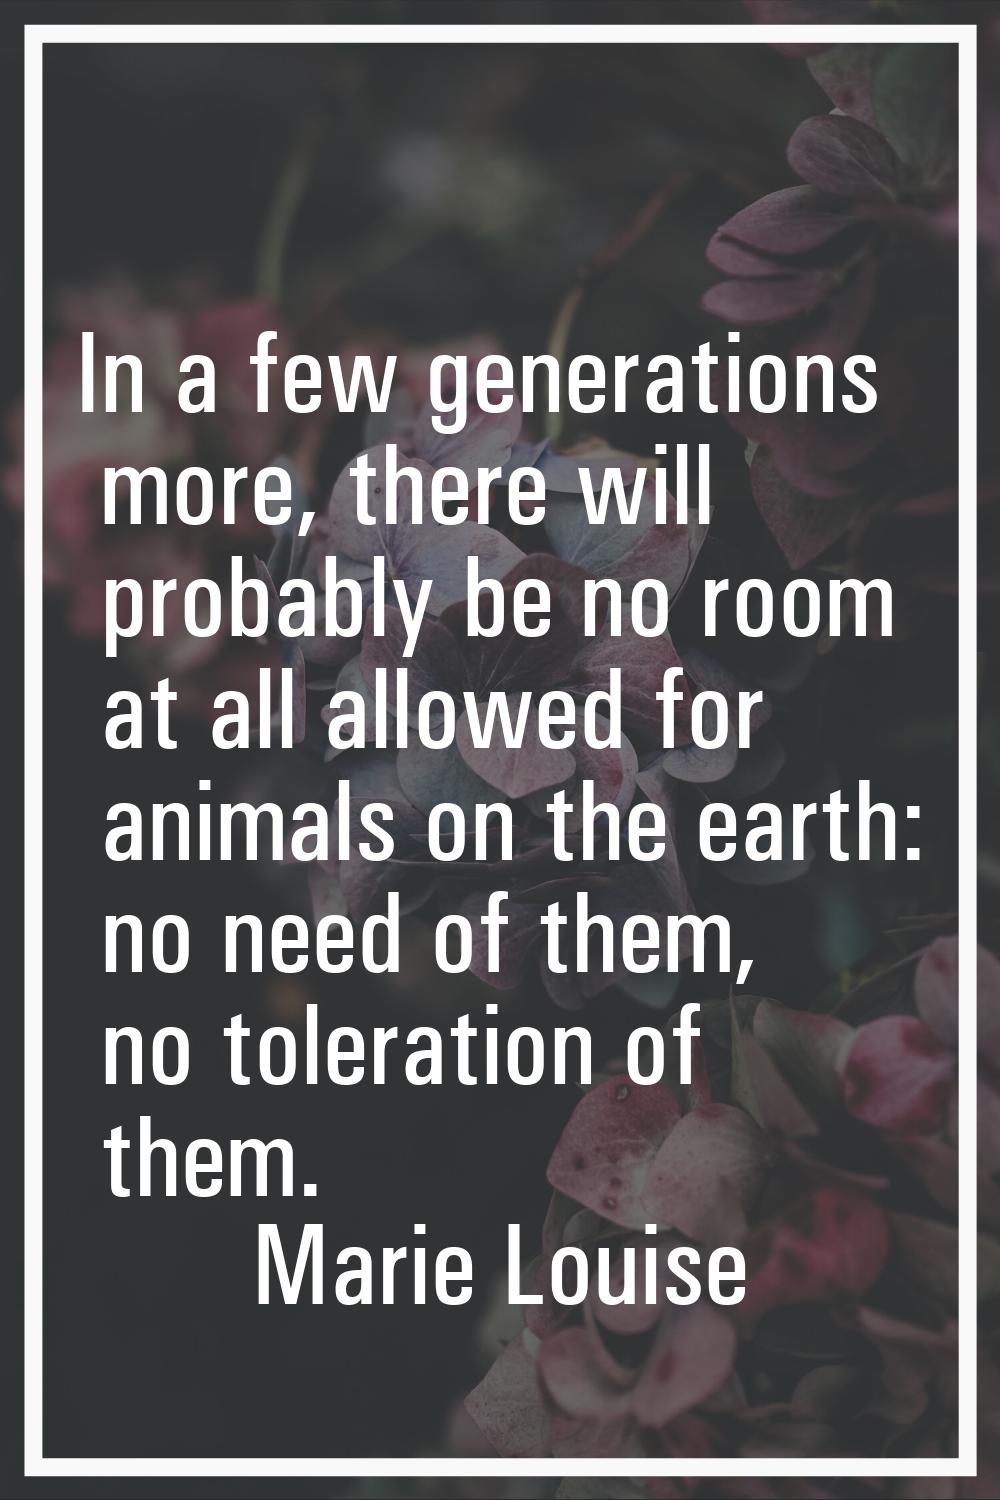 In a few generations more, there will probably be no room at all allowed for animals on the earth: 